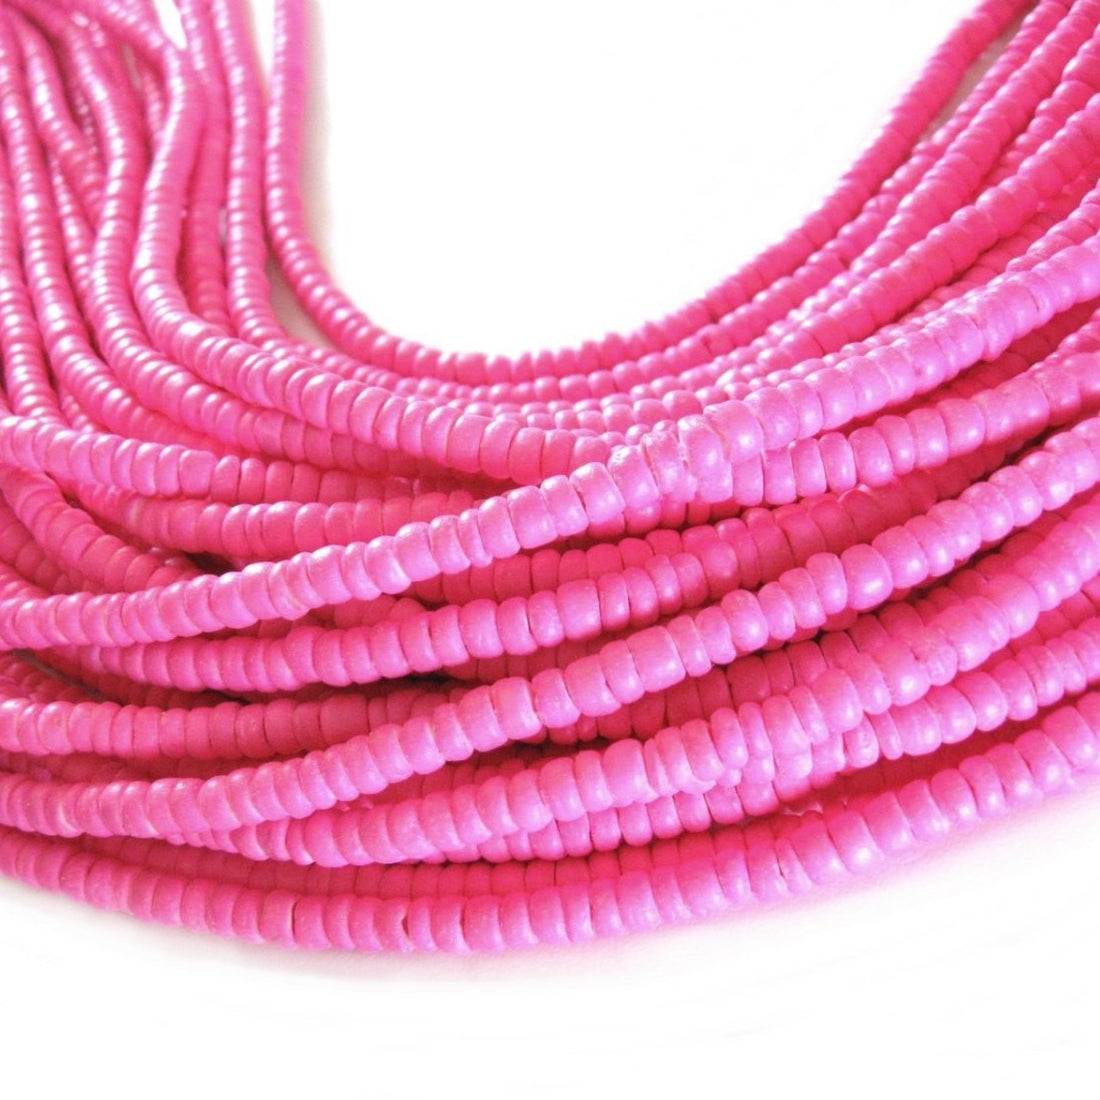 Coconut bead 150 pink wood Beads - Coconut Rondelle Disk Beads 4-5mm